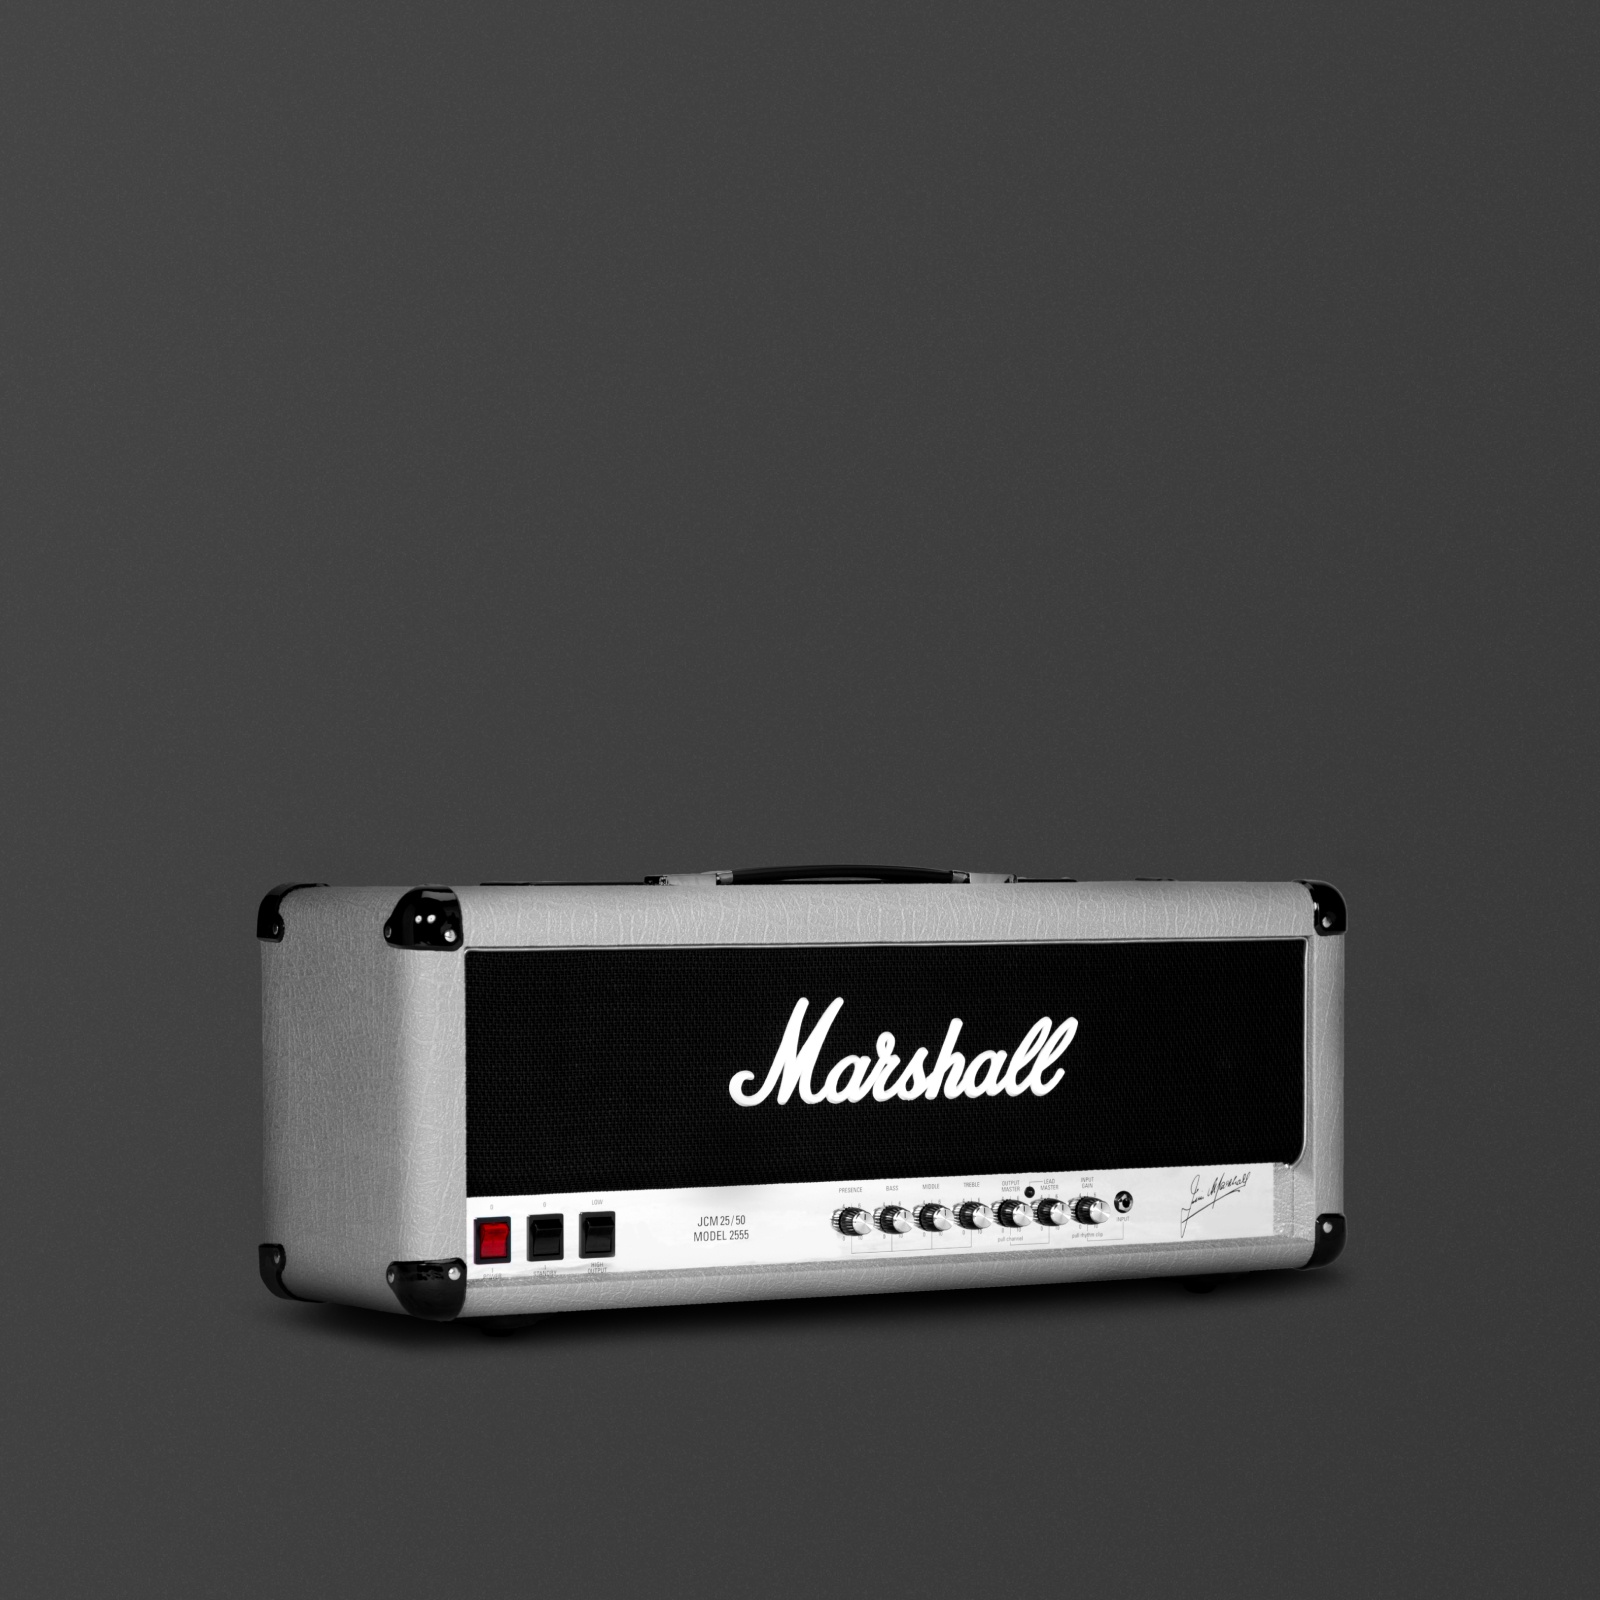 Marshall Silver Jubilee 2555X Vintage Reissue Headのアングル画像を右に。